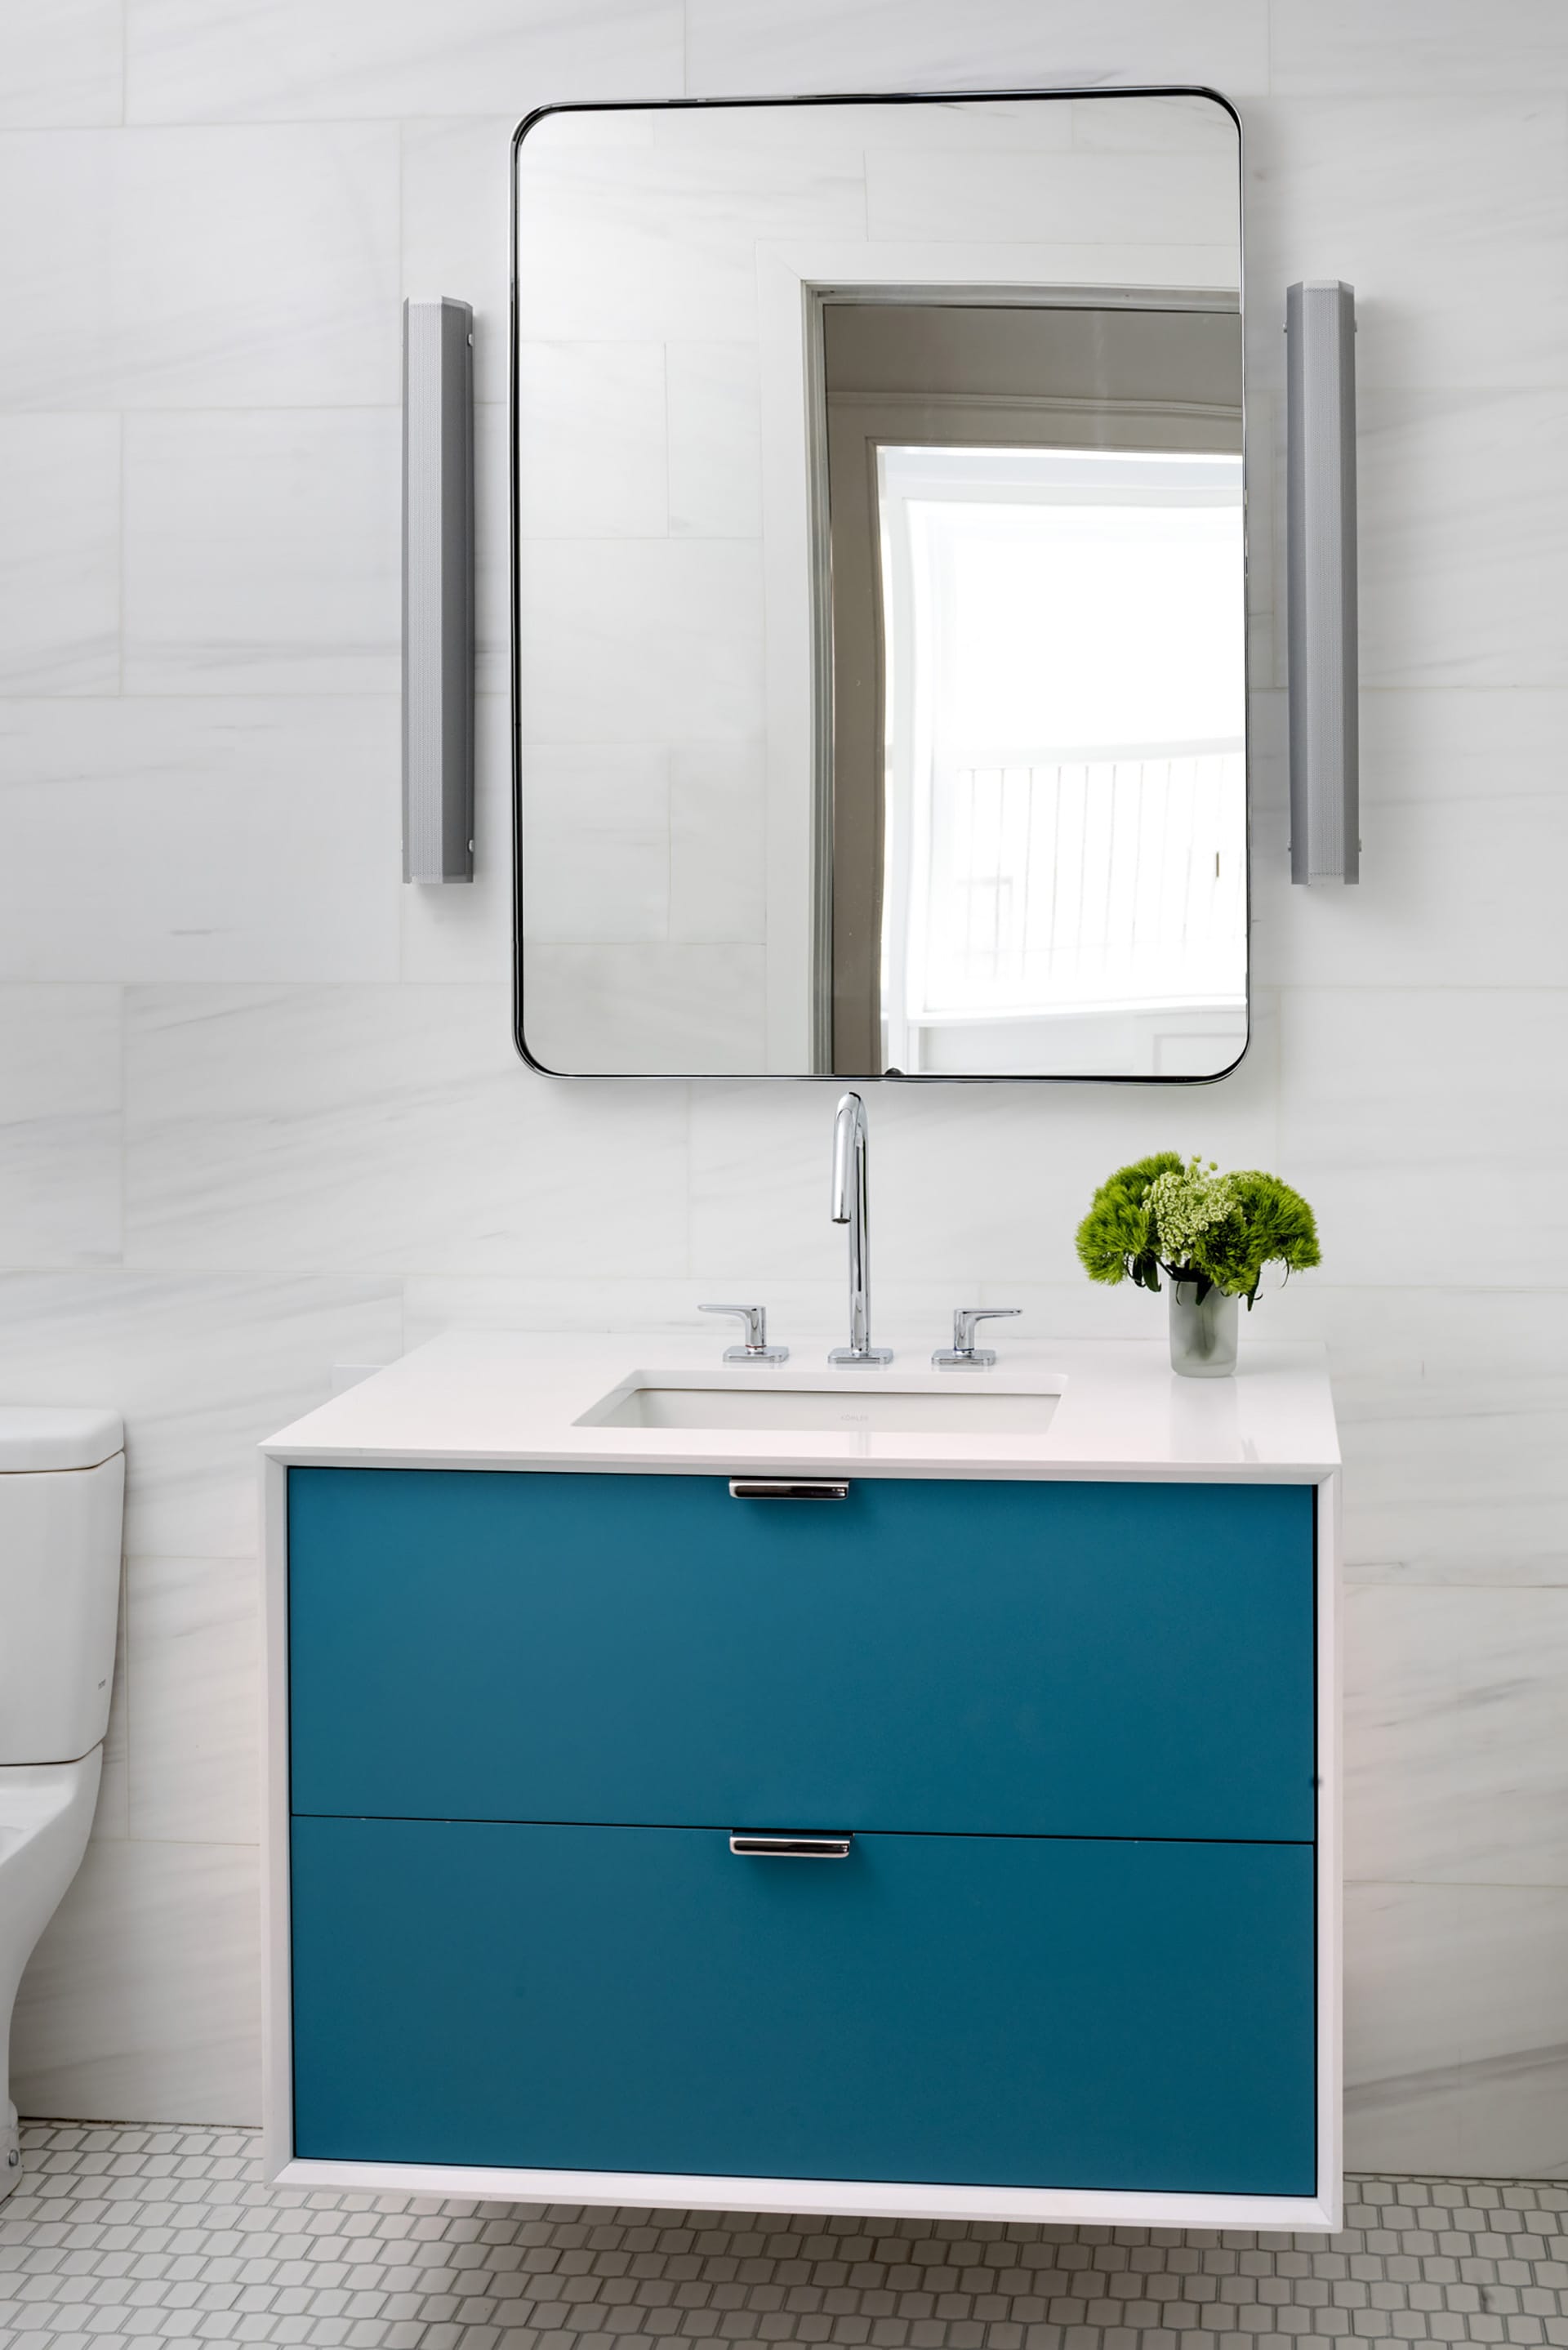 Floating vanity in an all-white bathroom with blue drawers